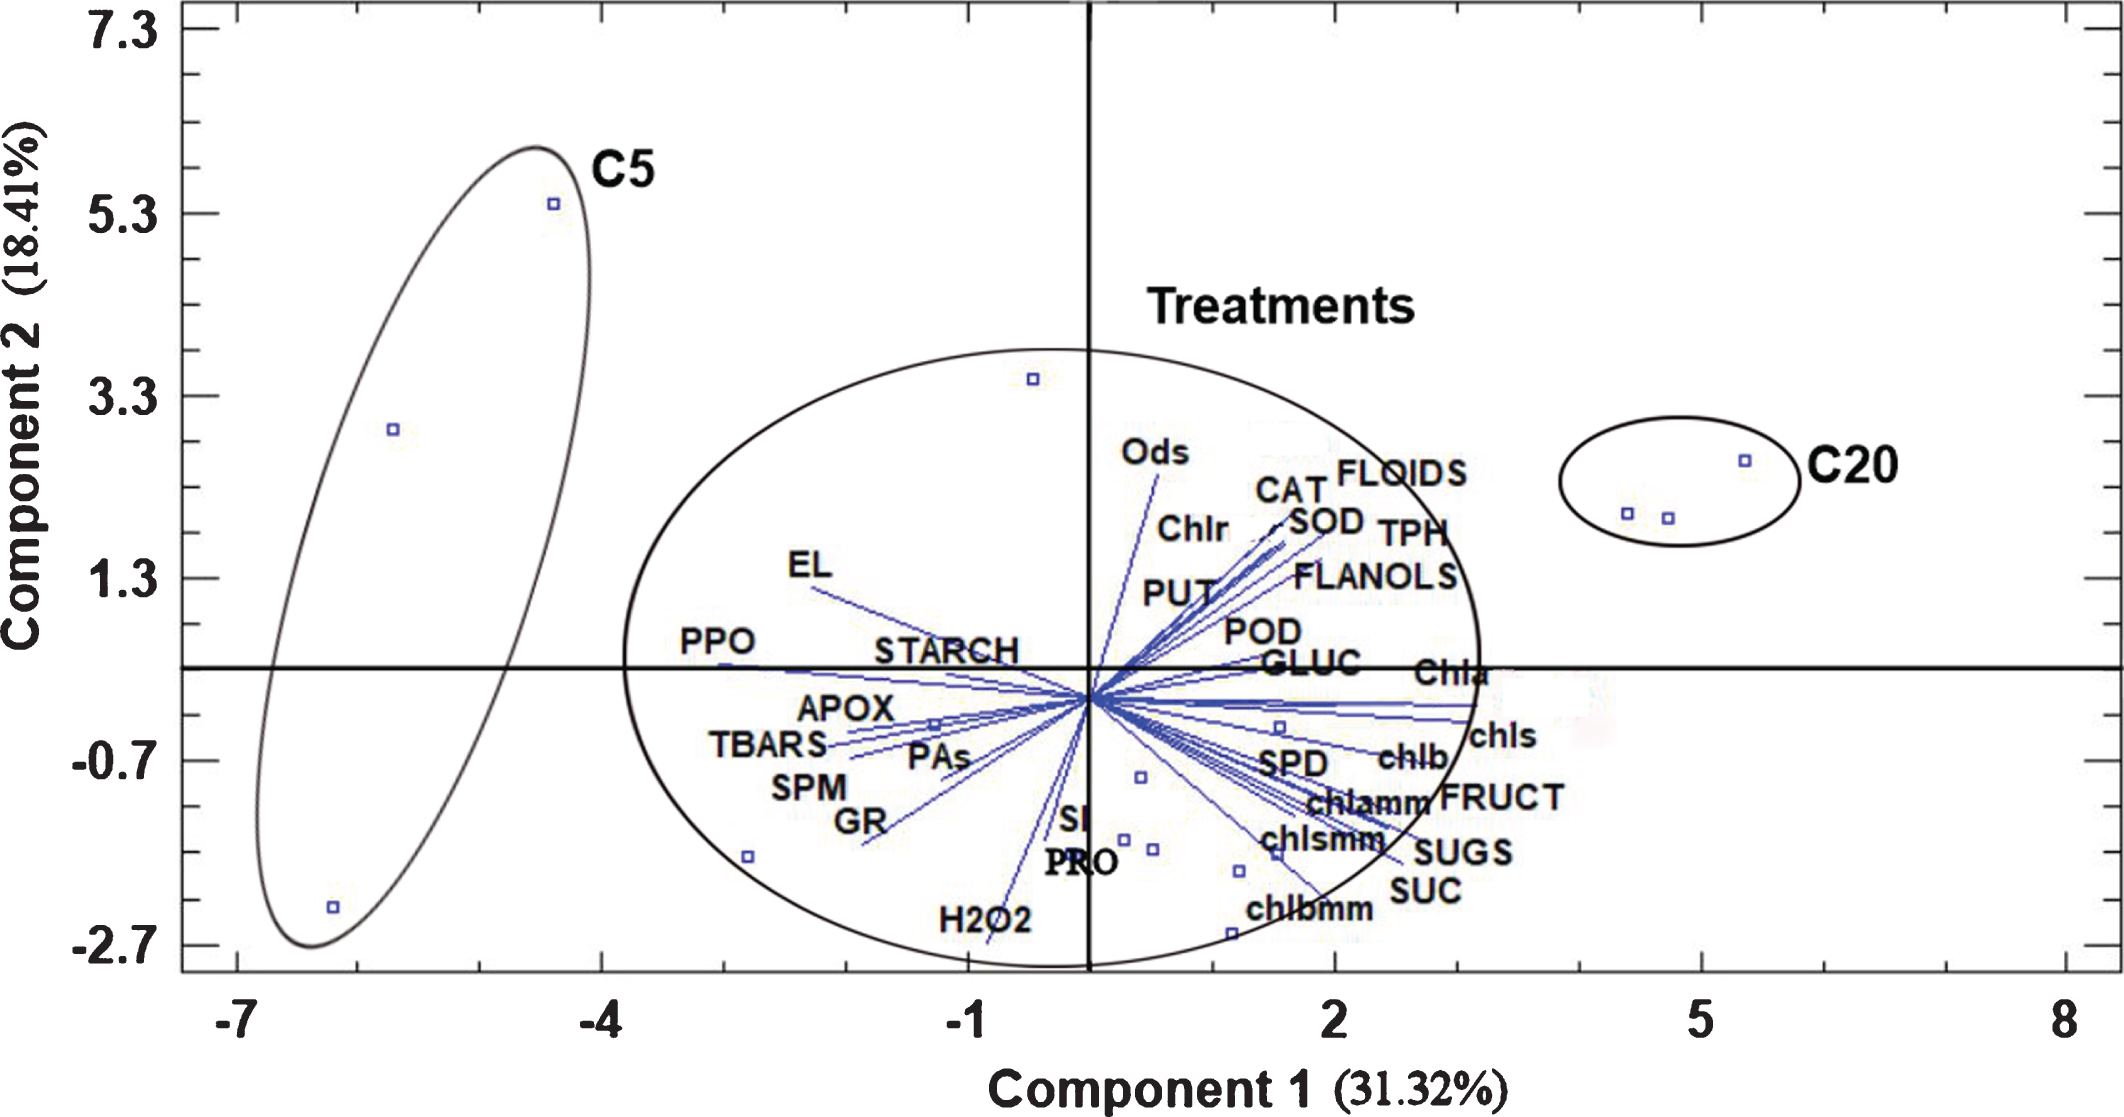 Bi-plot presentation of the principal component analysis and treatment classification based on the measured parameters in strawberry plants exposed to ambient and chilling temperatures. Abbreviations: C5, control at 5 °C, C20, control at 20 °C, Ods, o-diphenols, Chlr, chlorophyll ratio based on concentration, FLOIDS, total flavonoids, CAT, catalase, Chlrmm, chlorophyll ratio based on area, SOD, superoxide desmoutase, TPH, total phenols, FLANOLS, total flavanols, PUT, putrescine, POD, peroxidase, Chla, chlorophyll a, chls, total chlorophylls, chlb, chlorophyll b, SPD, spermidine, chlamm, chlorophyll a based on area, chlsmm, total chlorophylls based on area, GLUC, glucose, FRUCT, fructose, SUC, sucrose, SUGS, total soluble carbohydrates, chlbmm, chlorophyll b based on area, PRO, proline, SI, sucrolysis index, GR, glutathione reductase, PAs, total polyamines, SPM, spermine, TBARS, thiobarbituric reactive substances, APOX, ascorbate peroxidase, PPO, polyphenol oxidase, EL, electrolyte leakage.